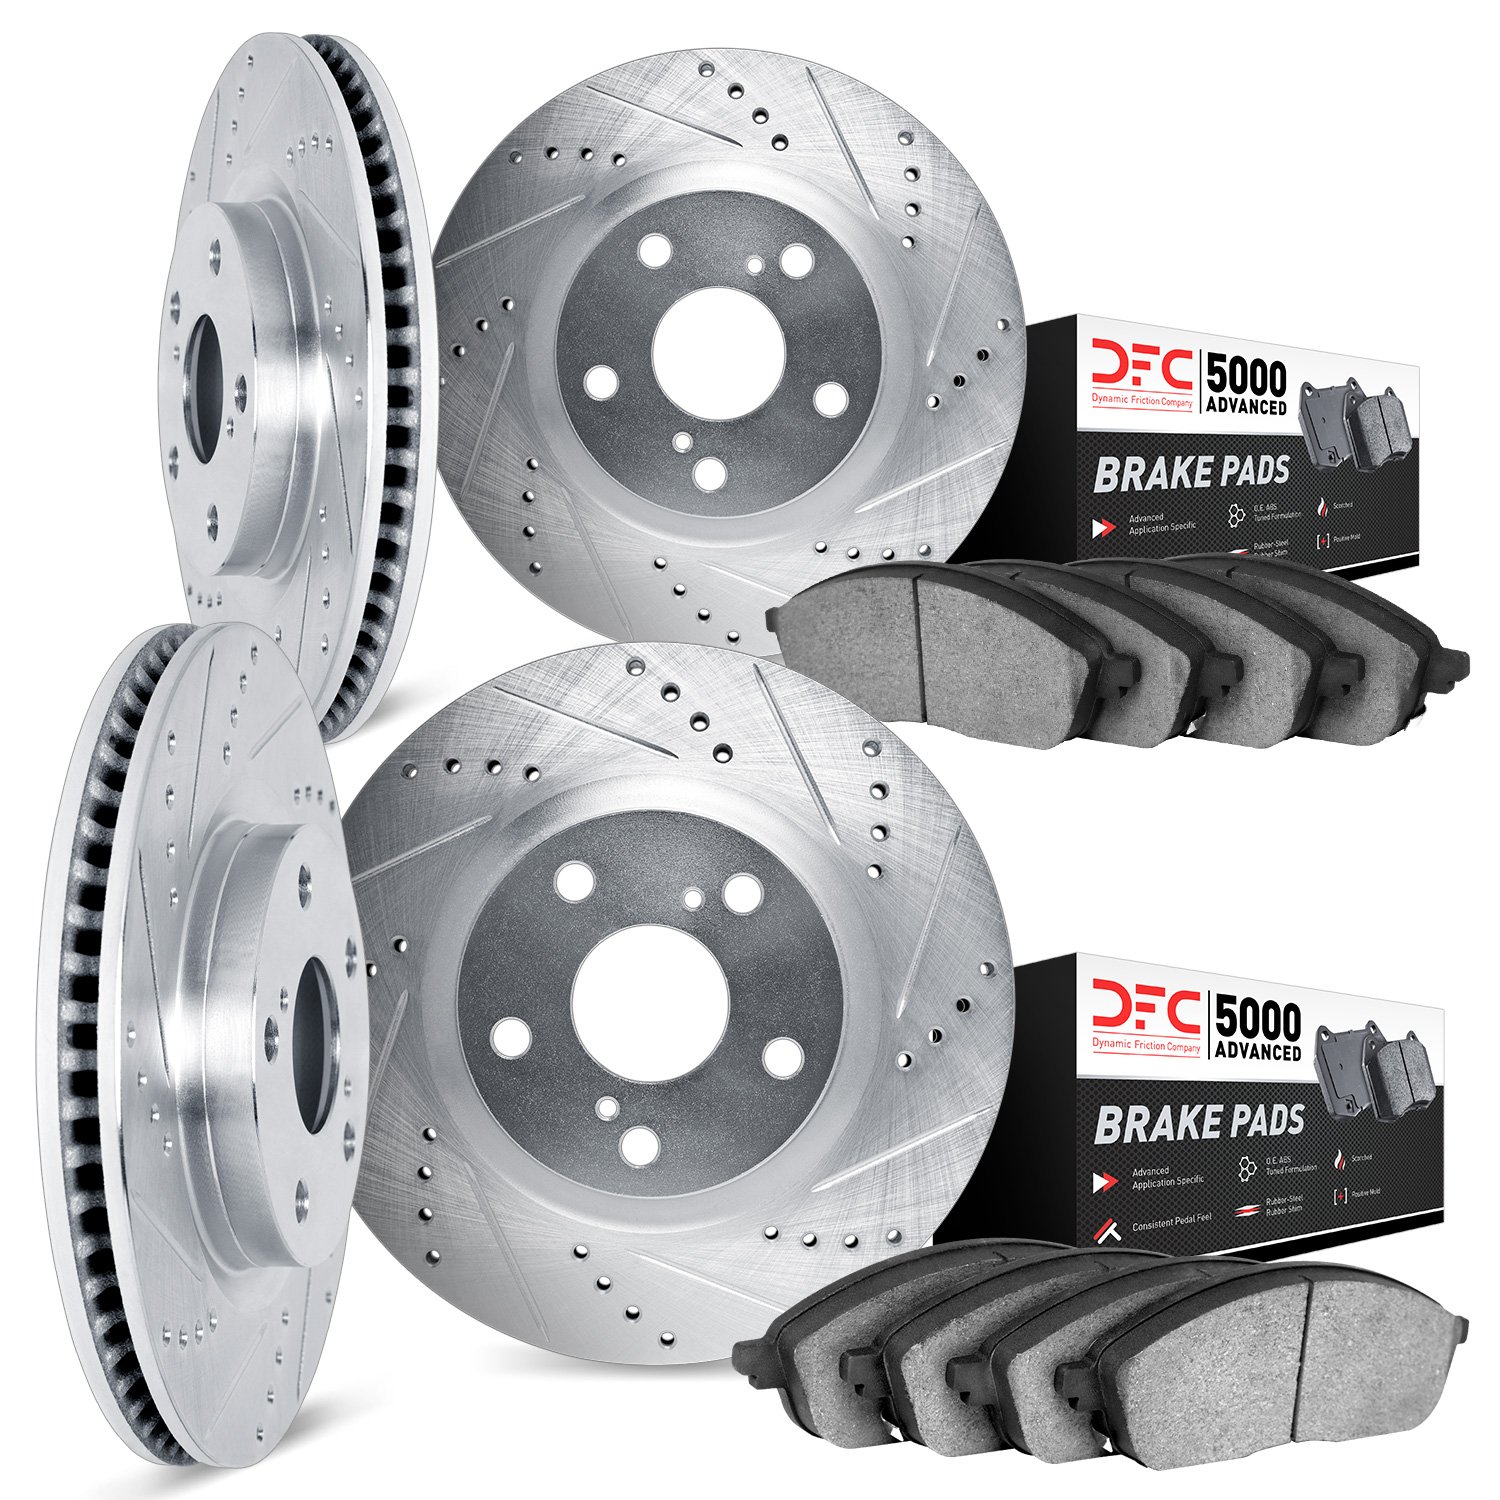 7504-02029 Drilled/Slotted Brake Rotors w/5000 Advanced Brake Pads Kit [Silver], 2014-2019 Porsche, Position: Front and Rear